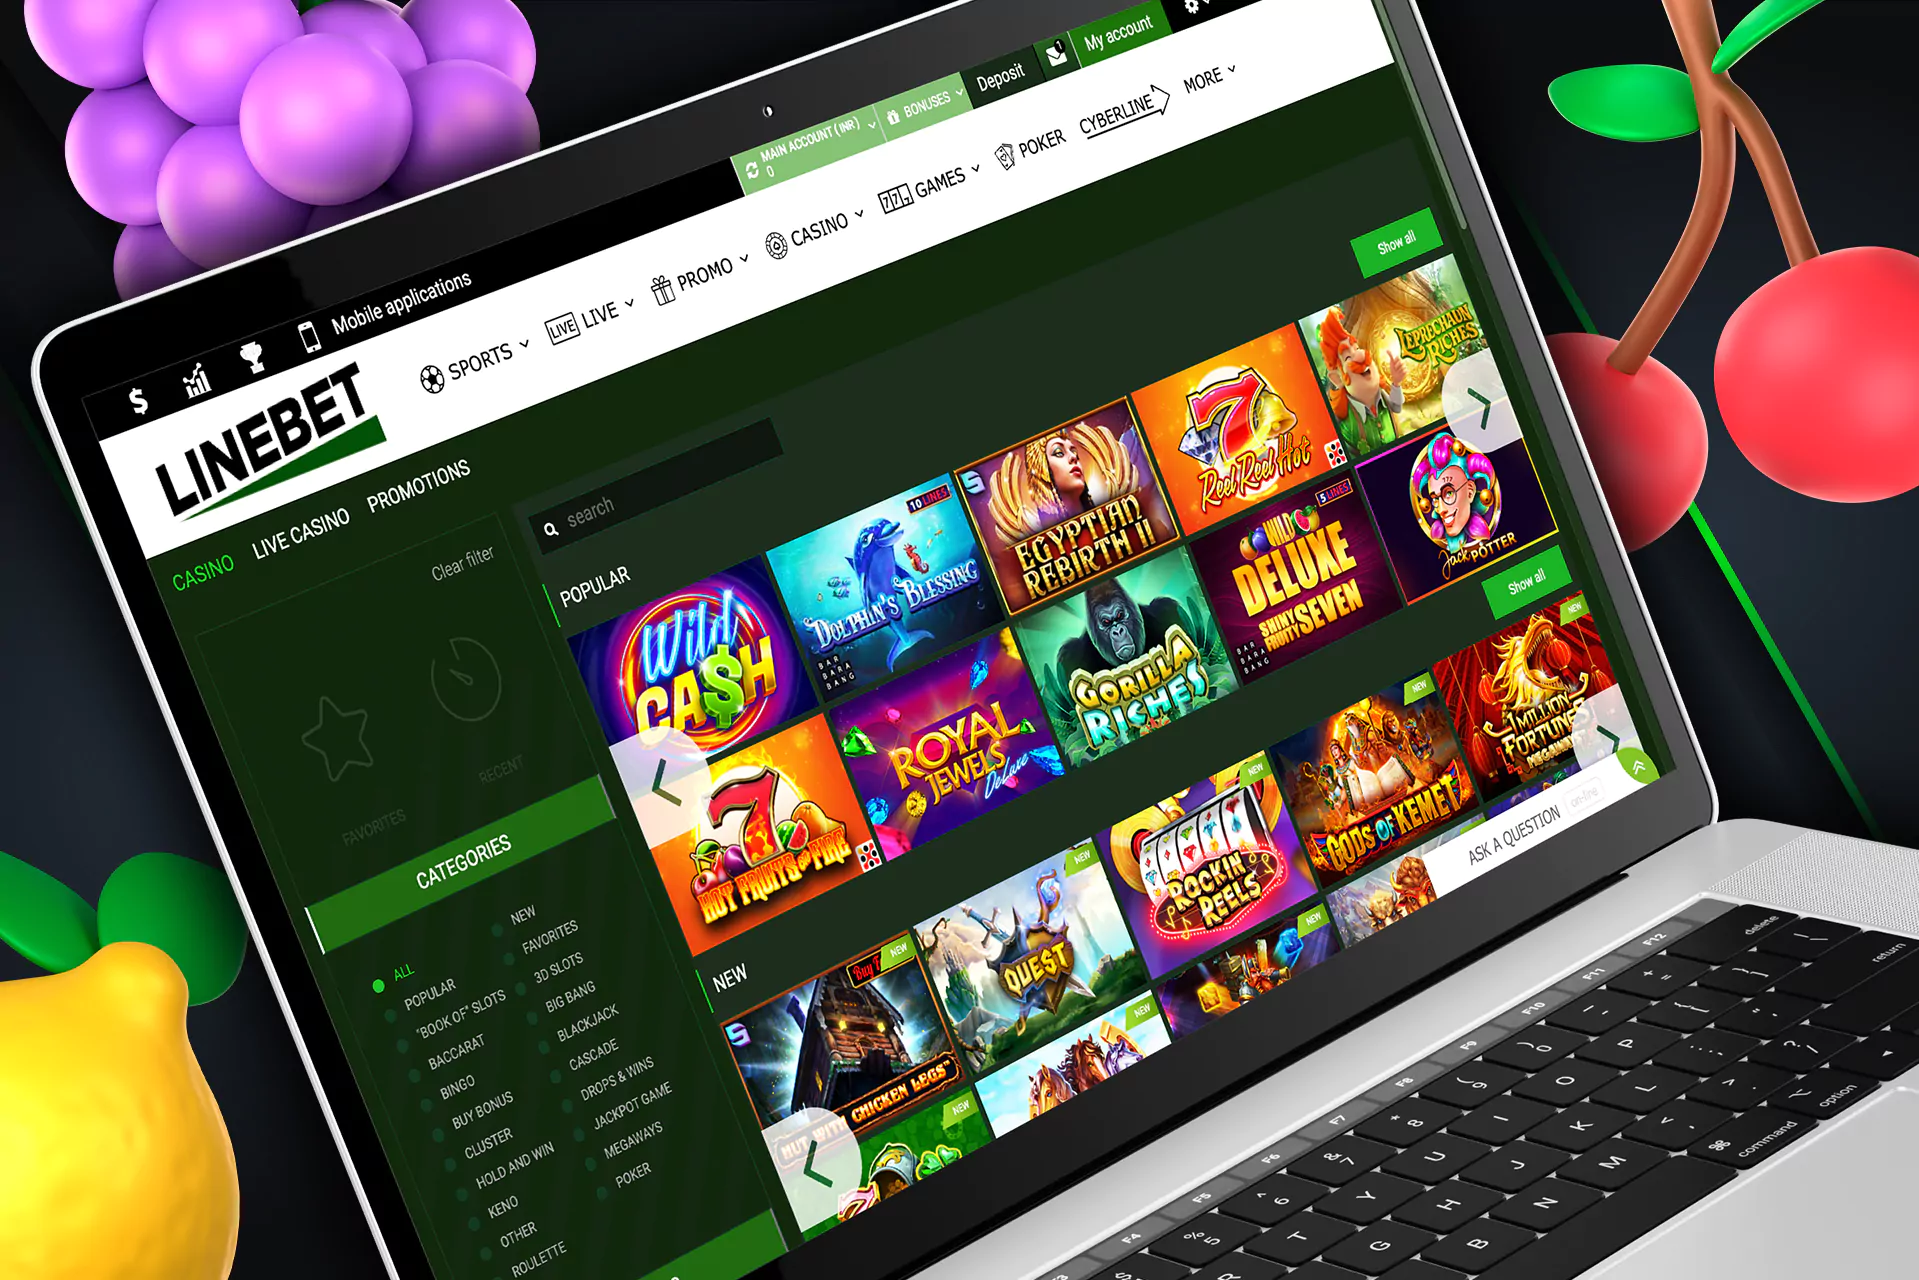 There is a wide range of well-known slots in the Linebet casino.